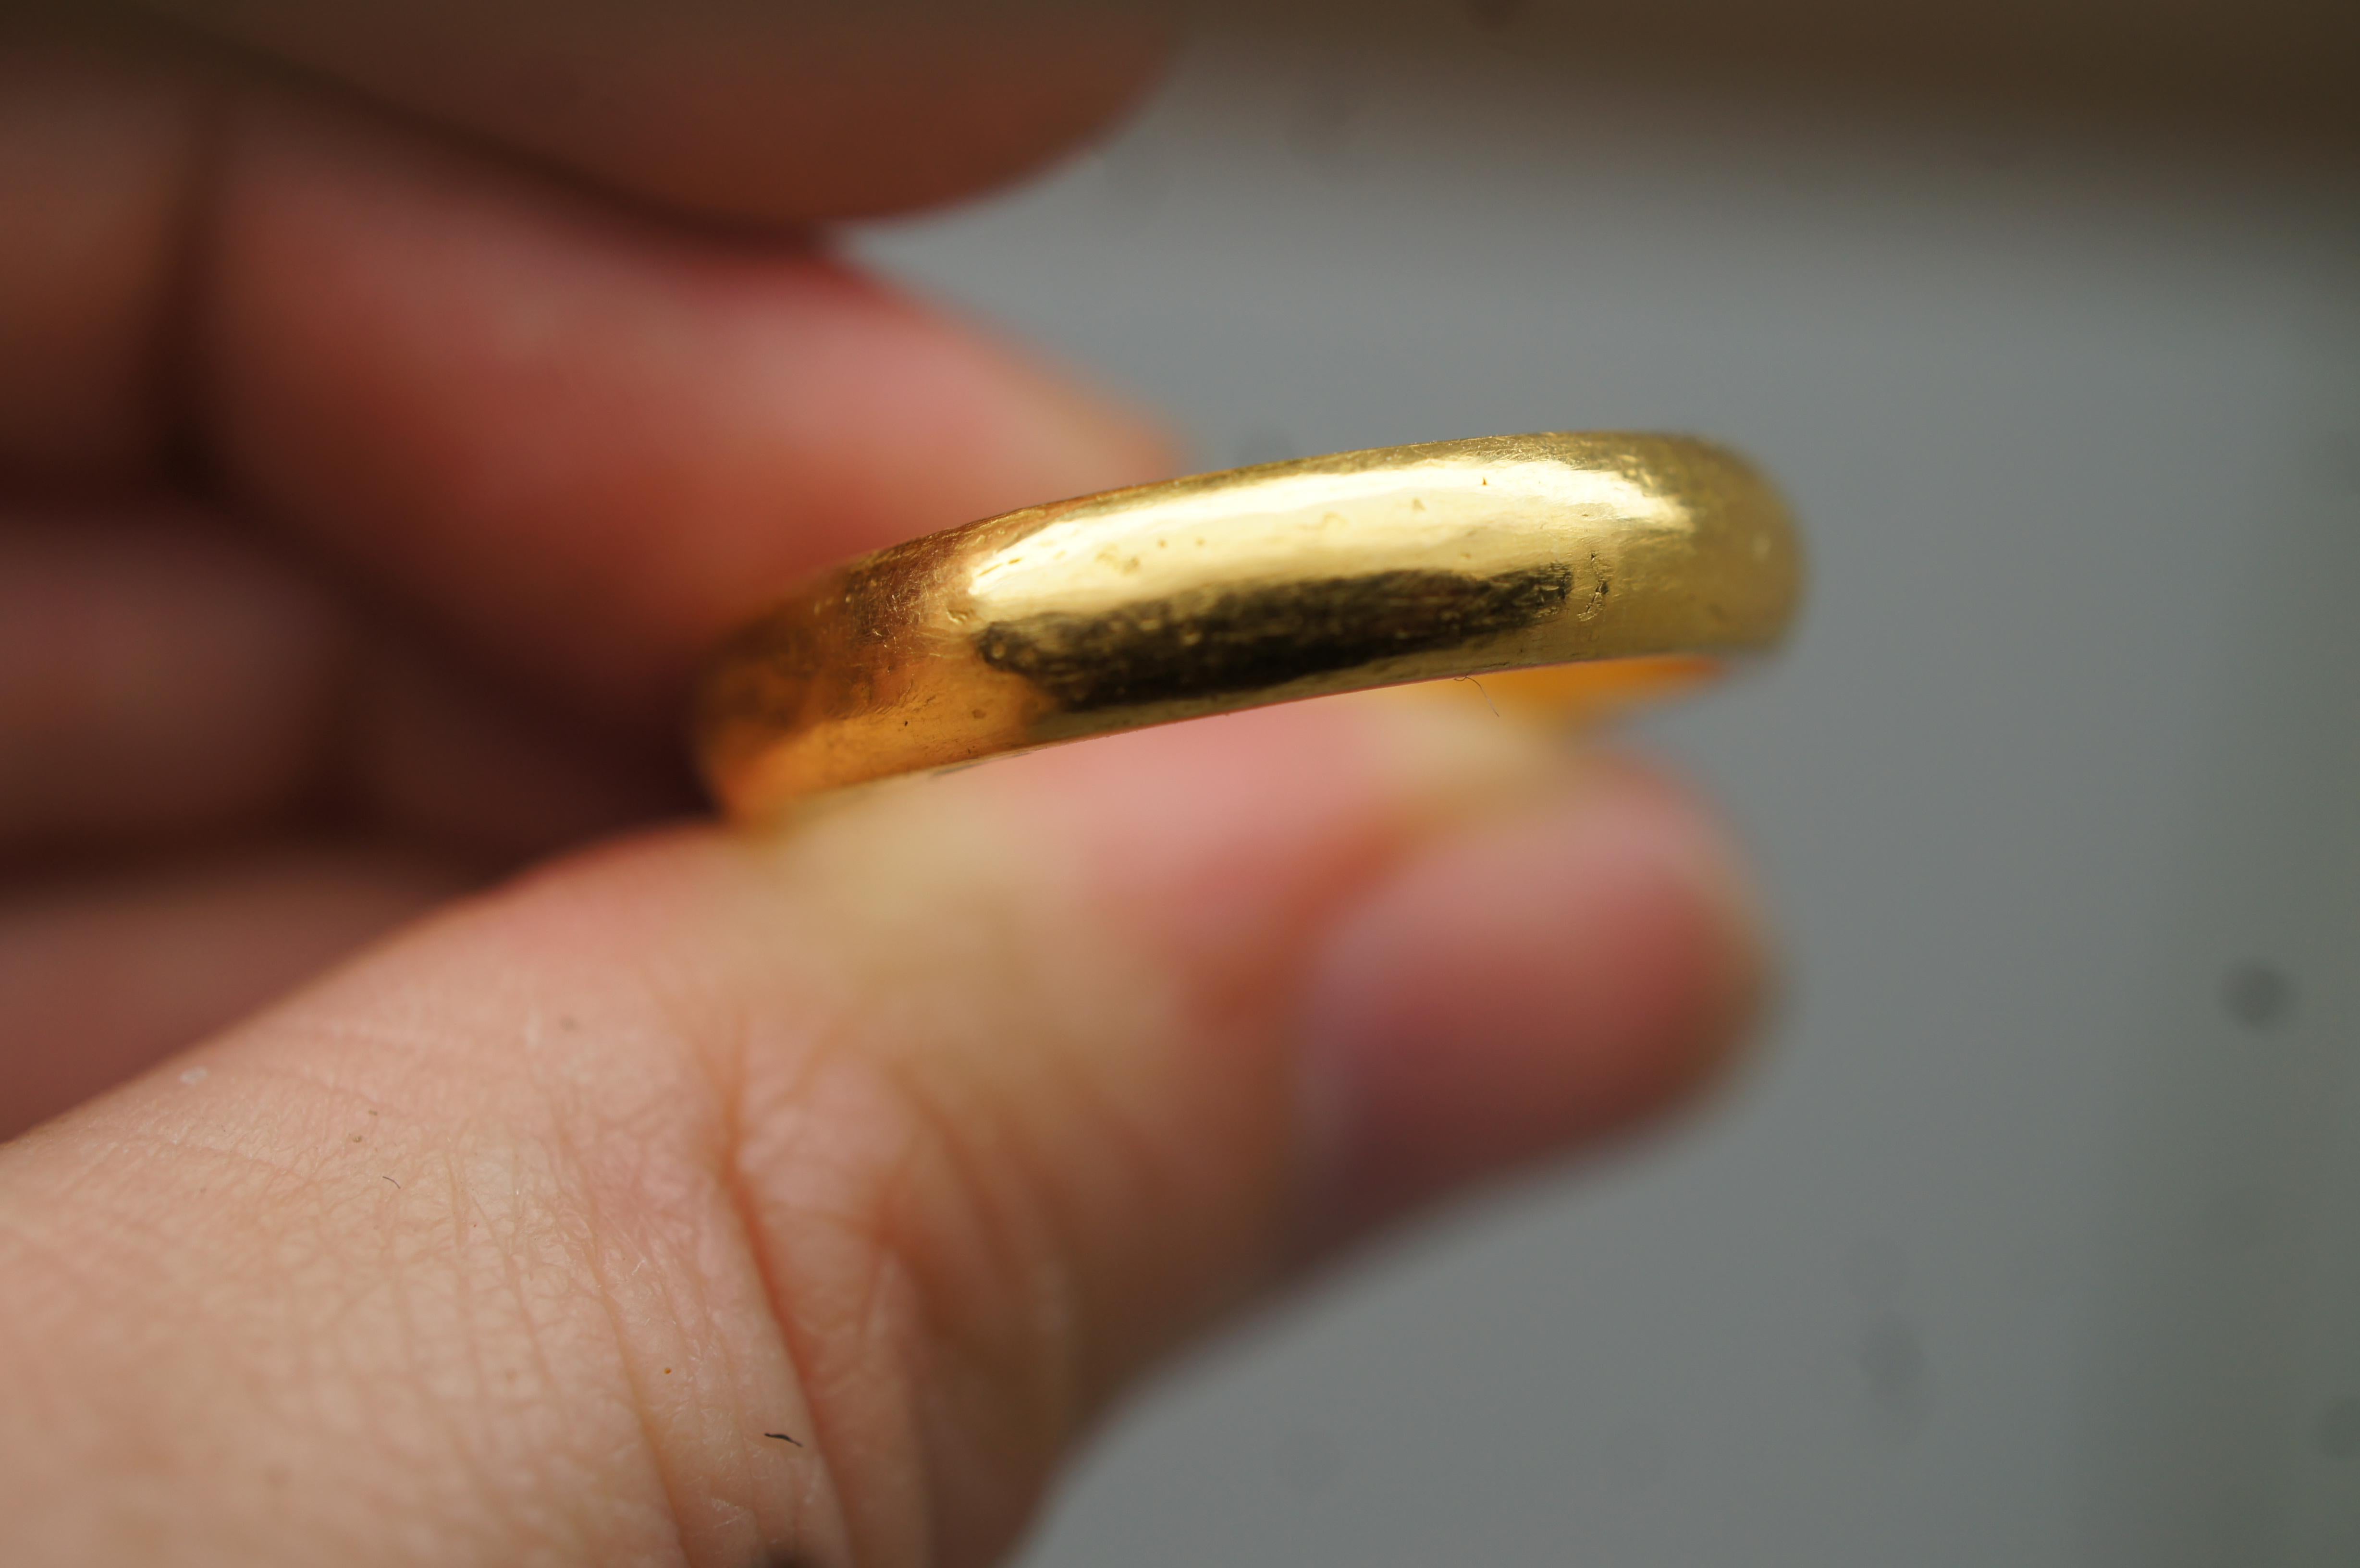 Vintage 24k Solid Yellow Gold Wedding Band Engagement Ring 10.5g In Good Condition For Sale In Dayton, OH